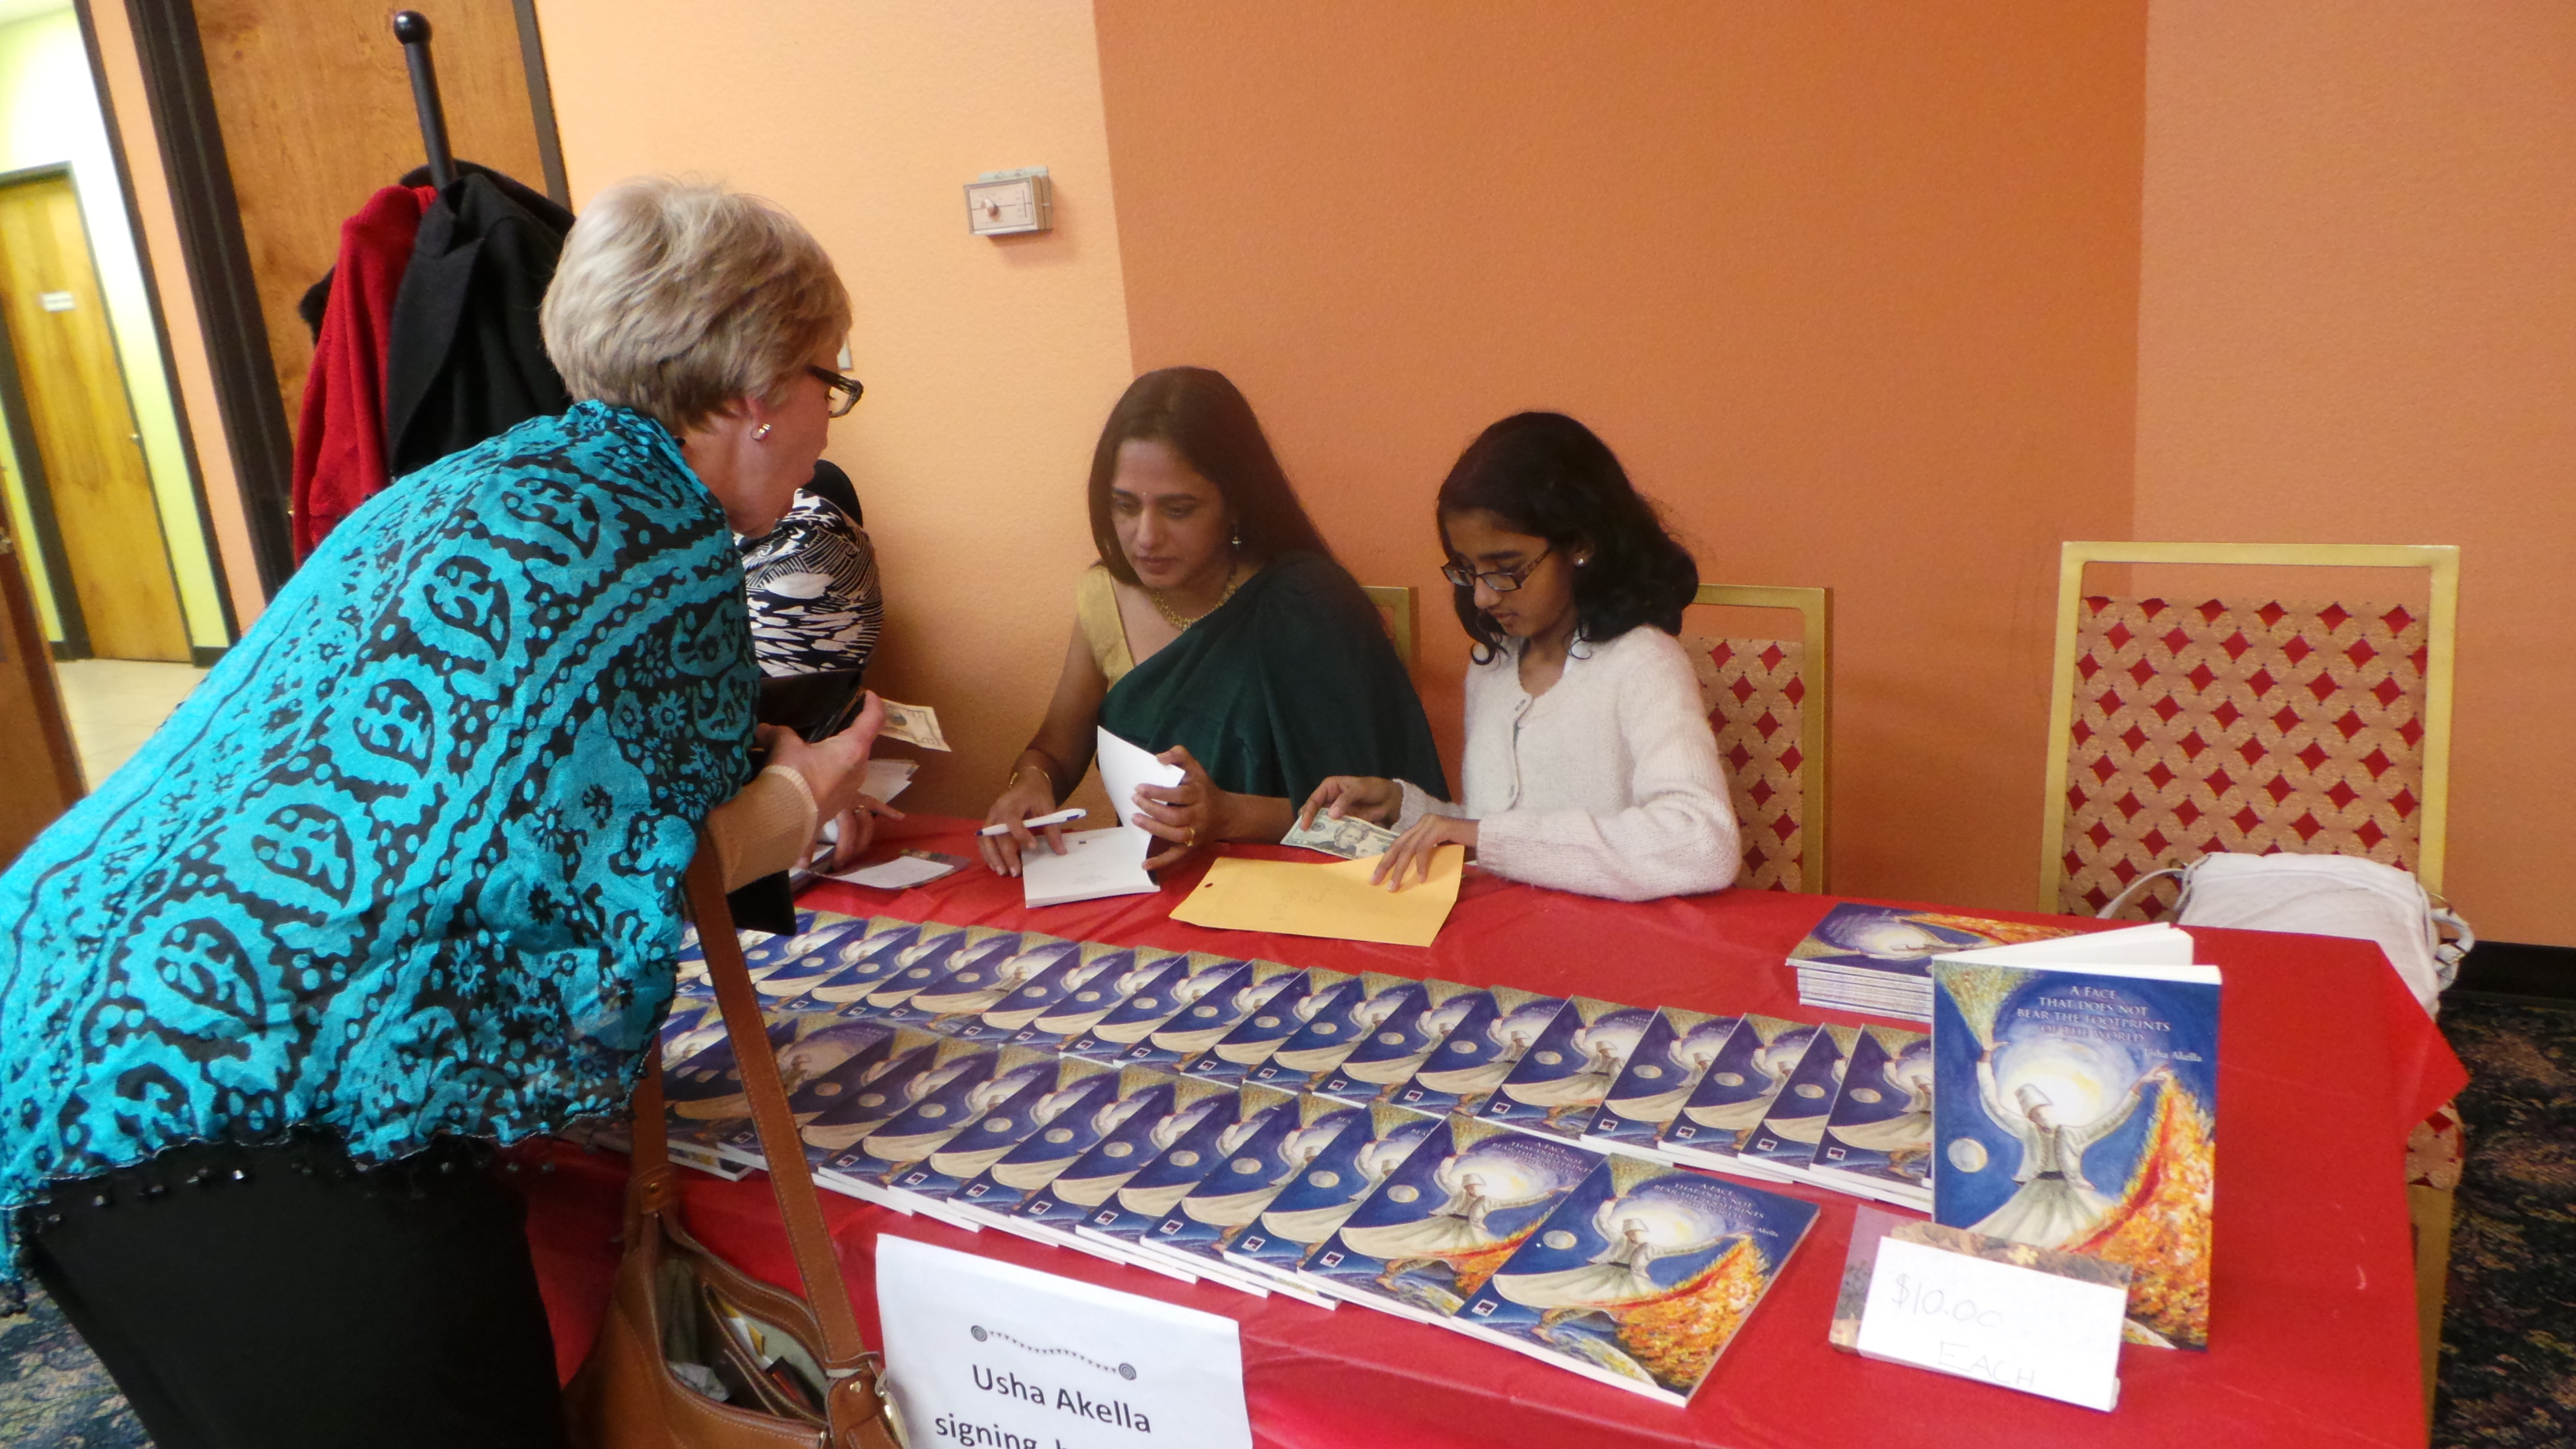 Usha Akella with her daughter Anannya at the book signing in Austin